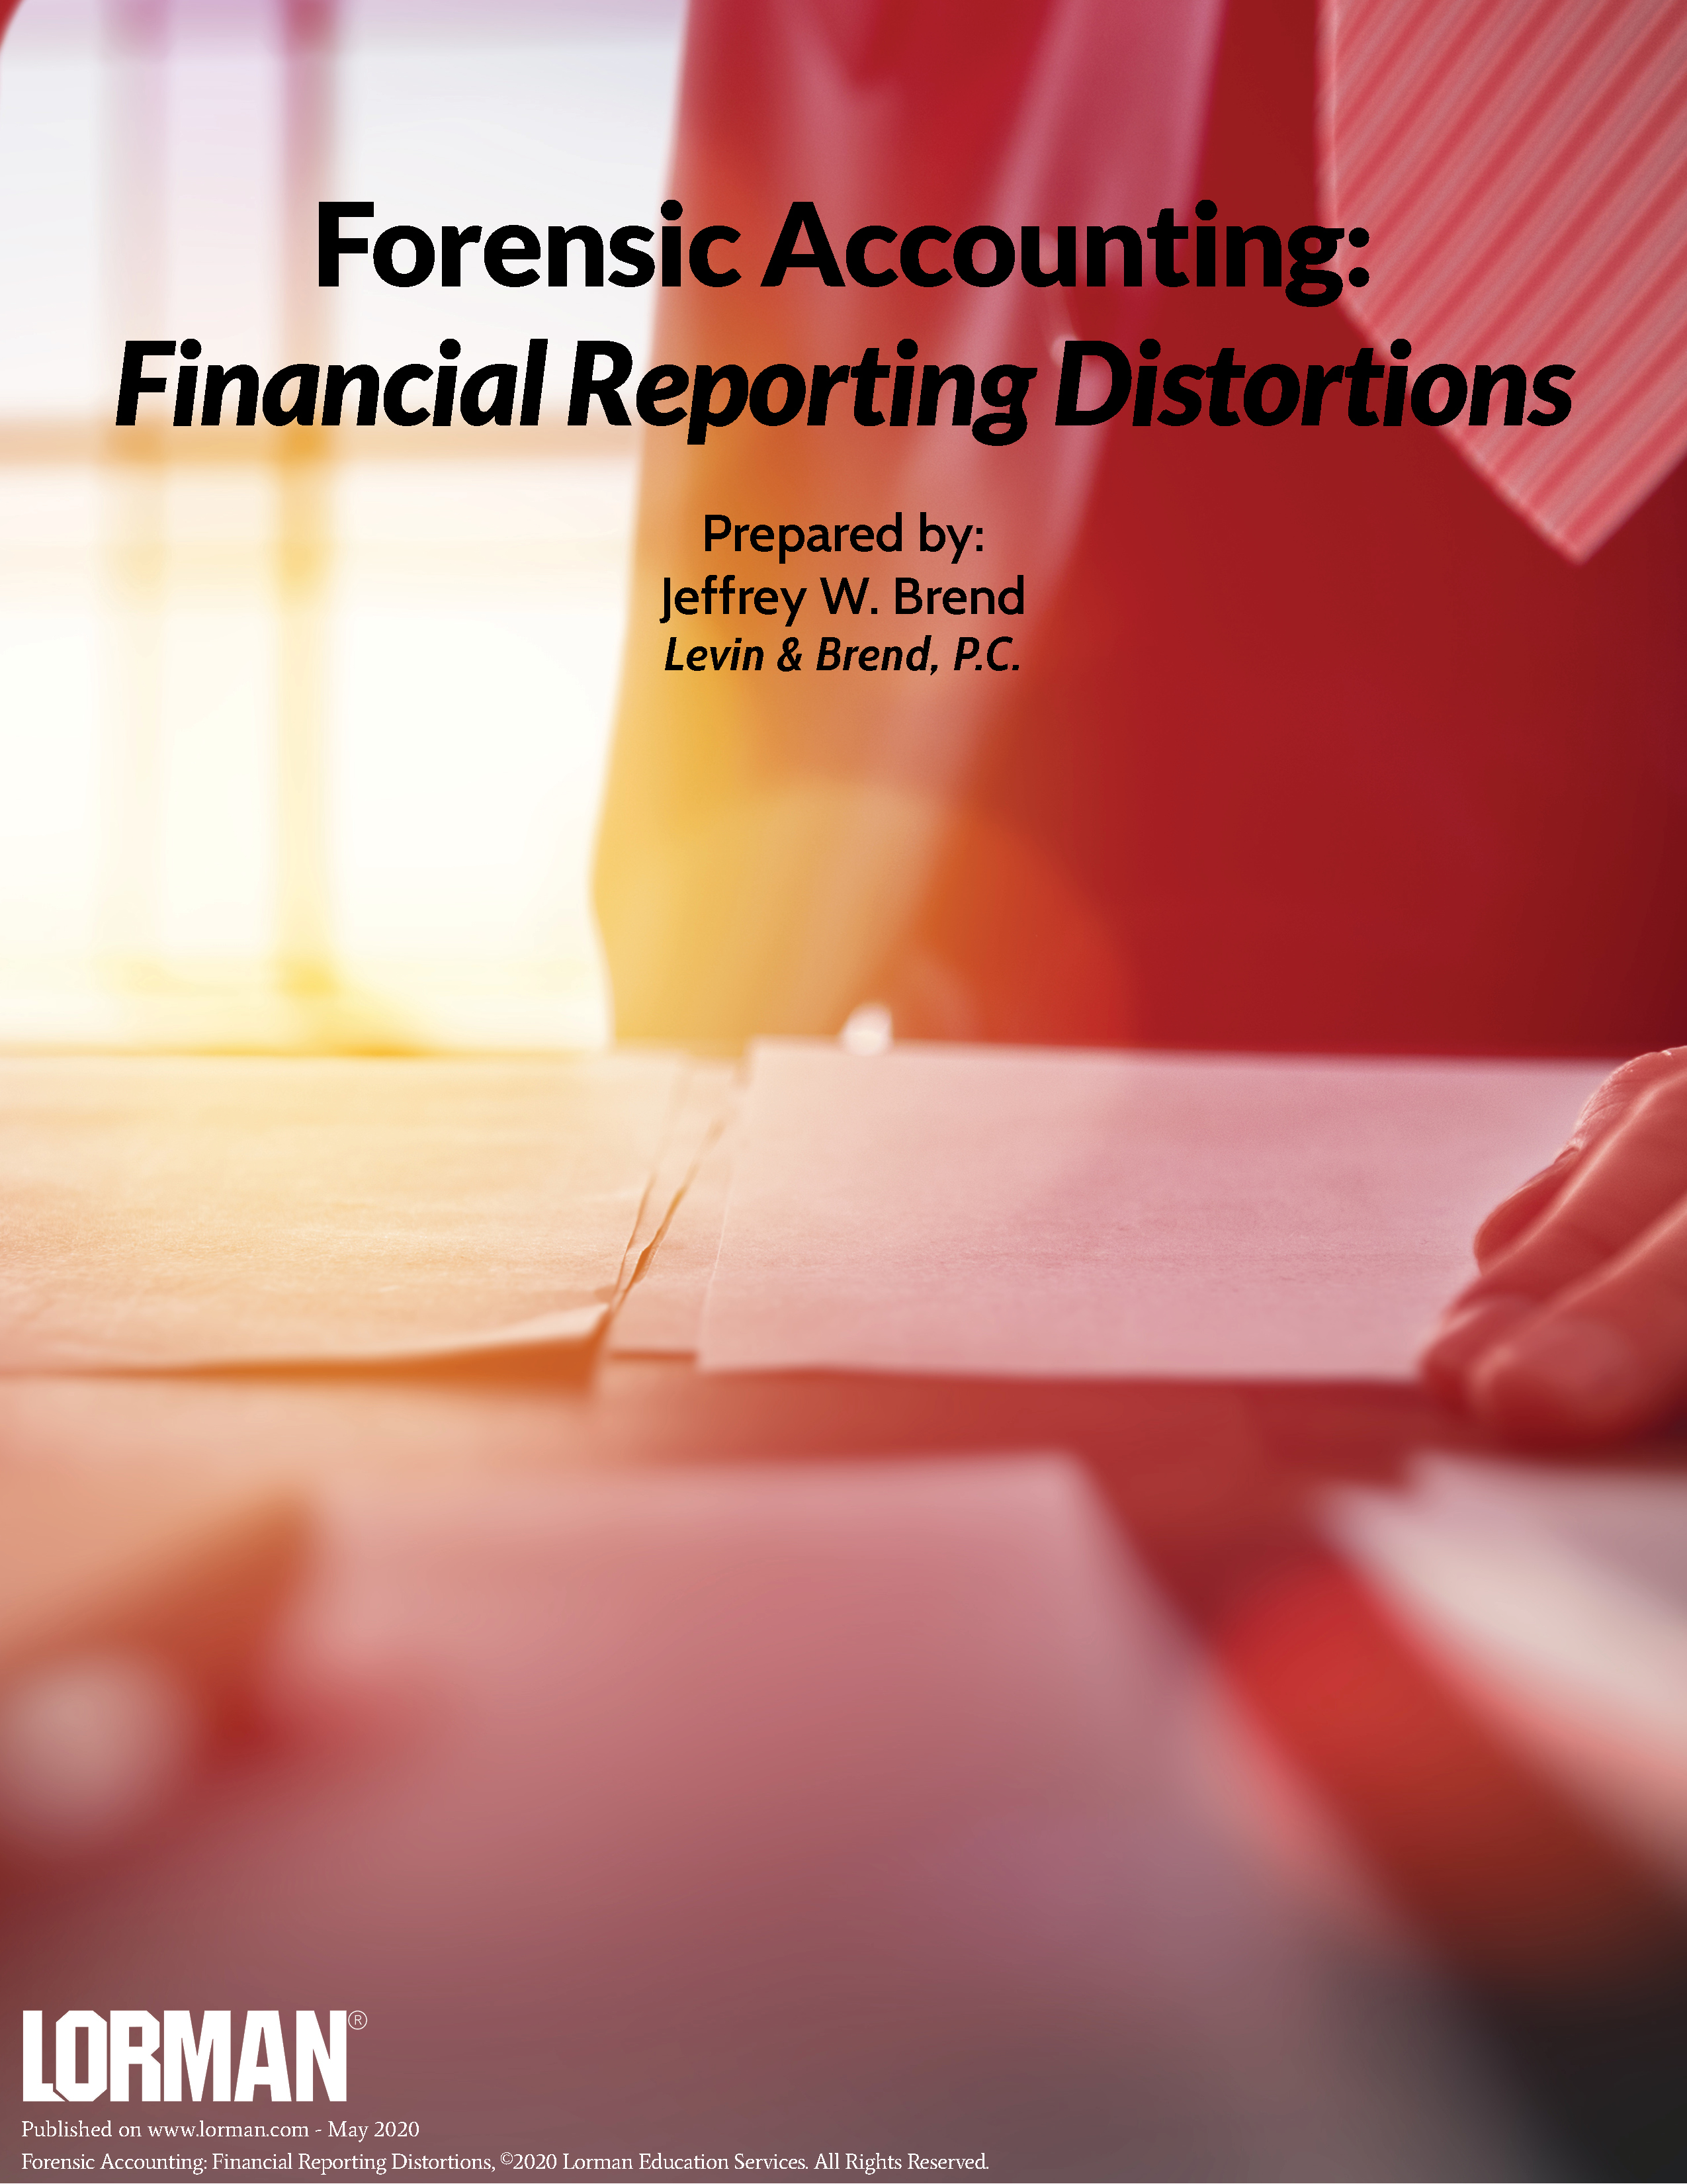 Forensic Accounting: Financial Reporting Distortions